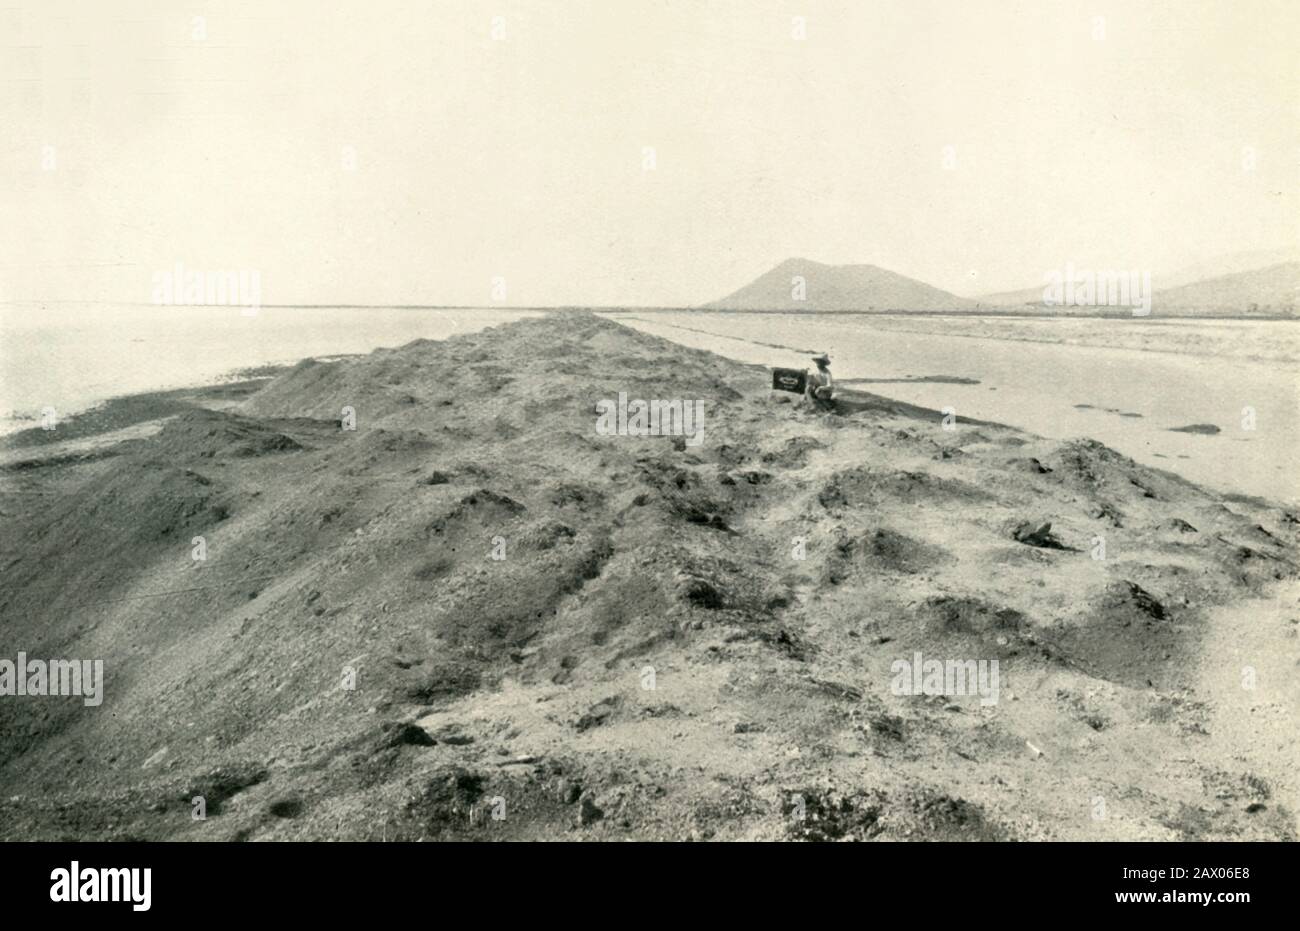 'The Valley of Mexico: View on Lake Texcoco; The Modern City of Mexico in the Distance', 1919. From &quot;Mexico&quot;, by C. Reginald Enock, F.R.G.S. [Charles Scribner's Sons, New York, 1919] Stock Photo